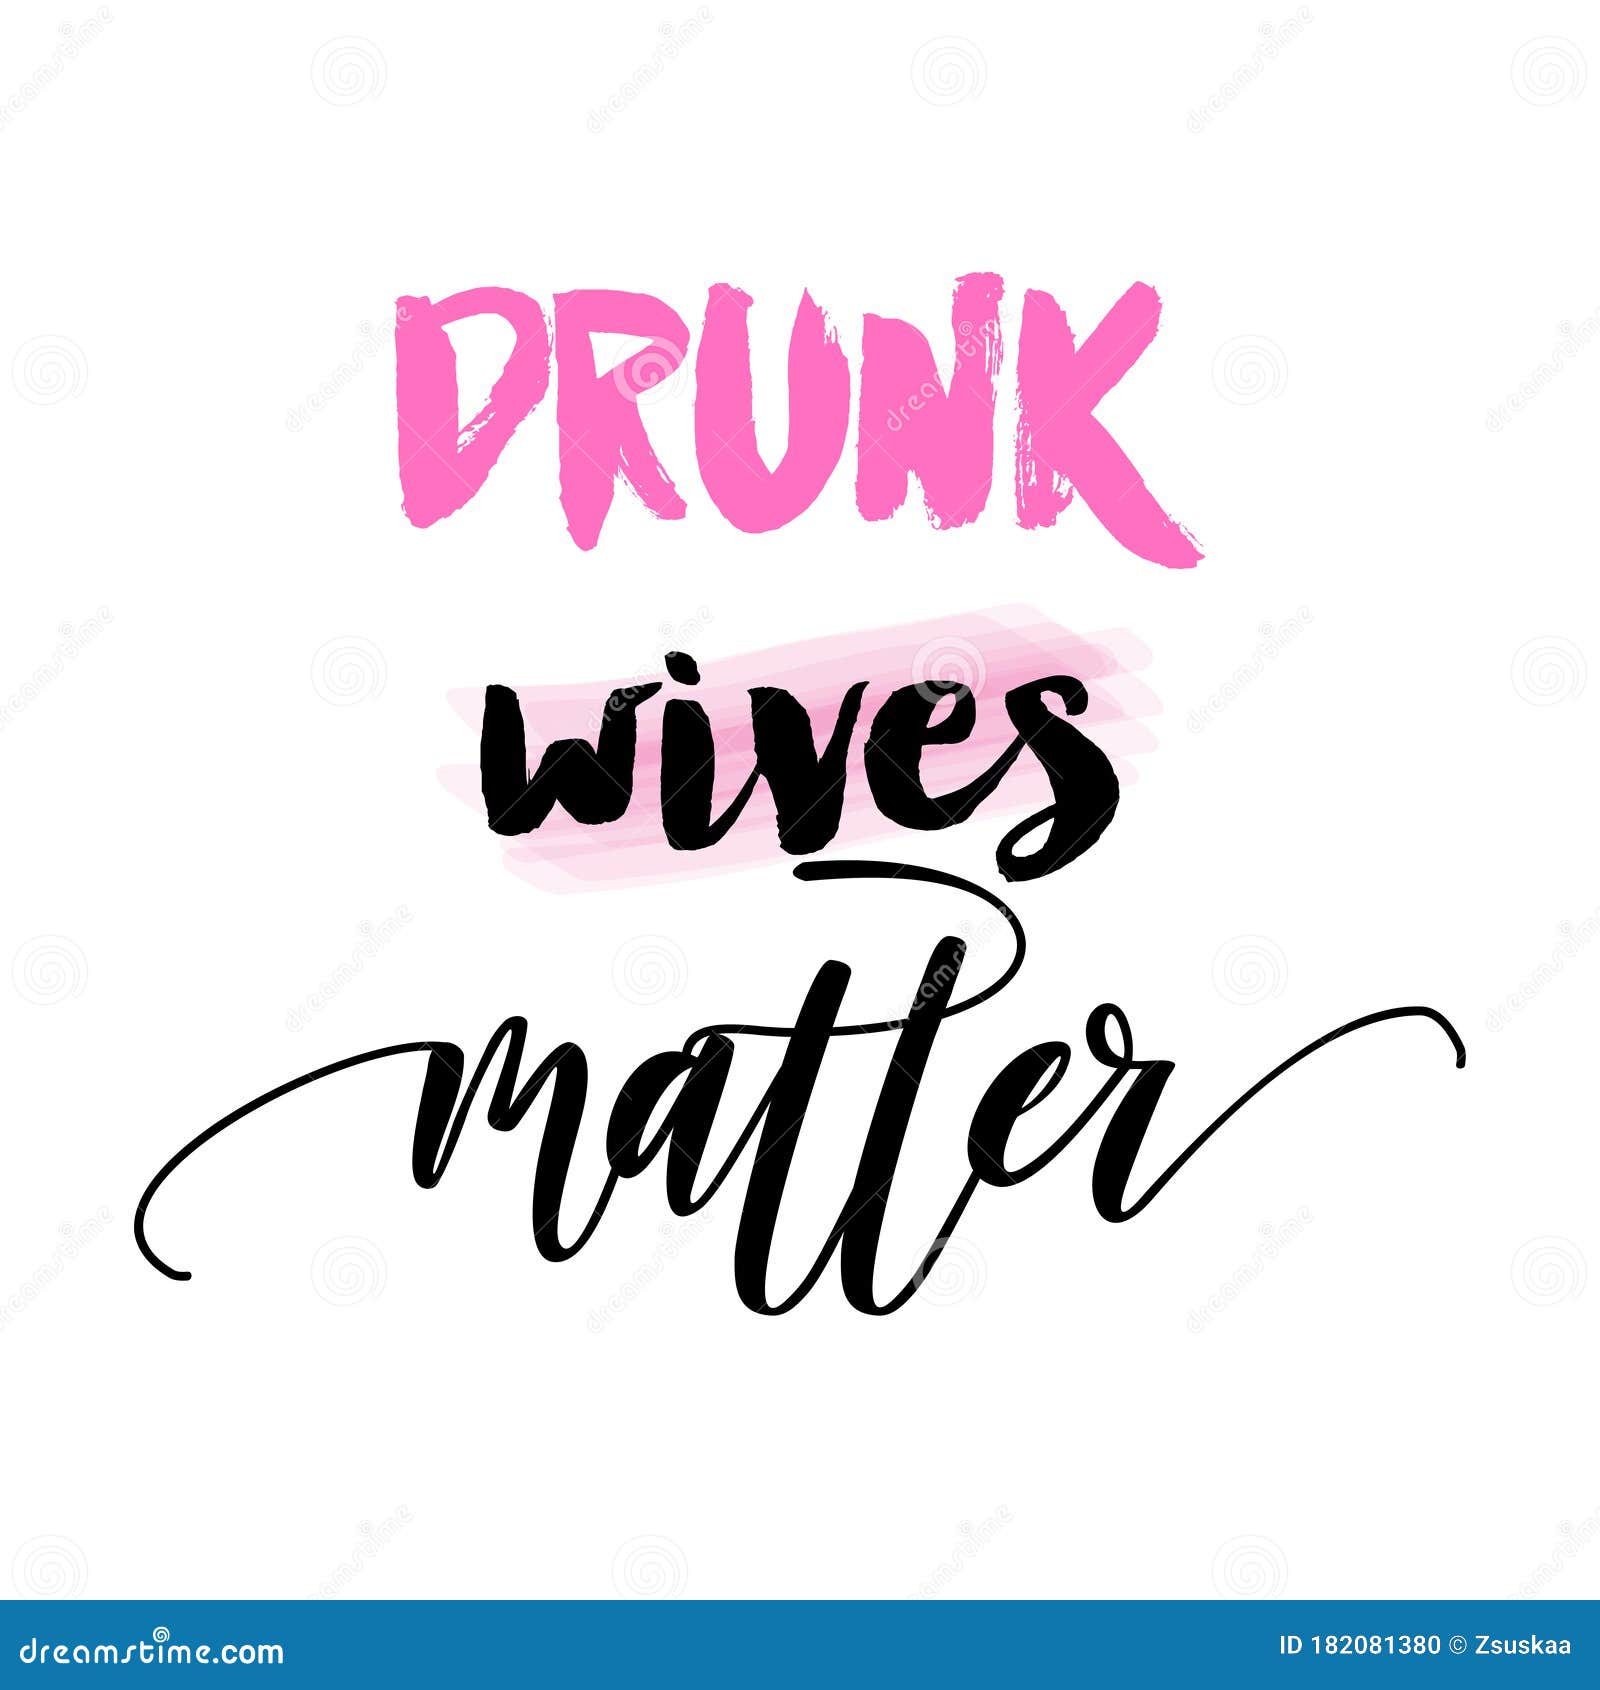 drunk wives matter - funny party saying for girls.